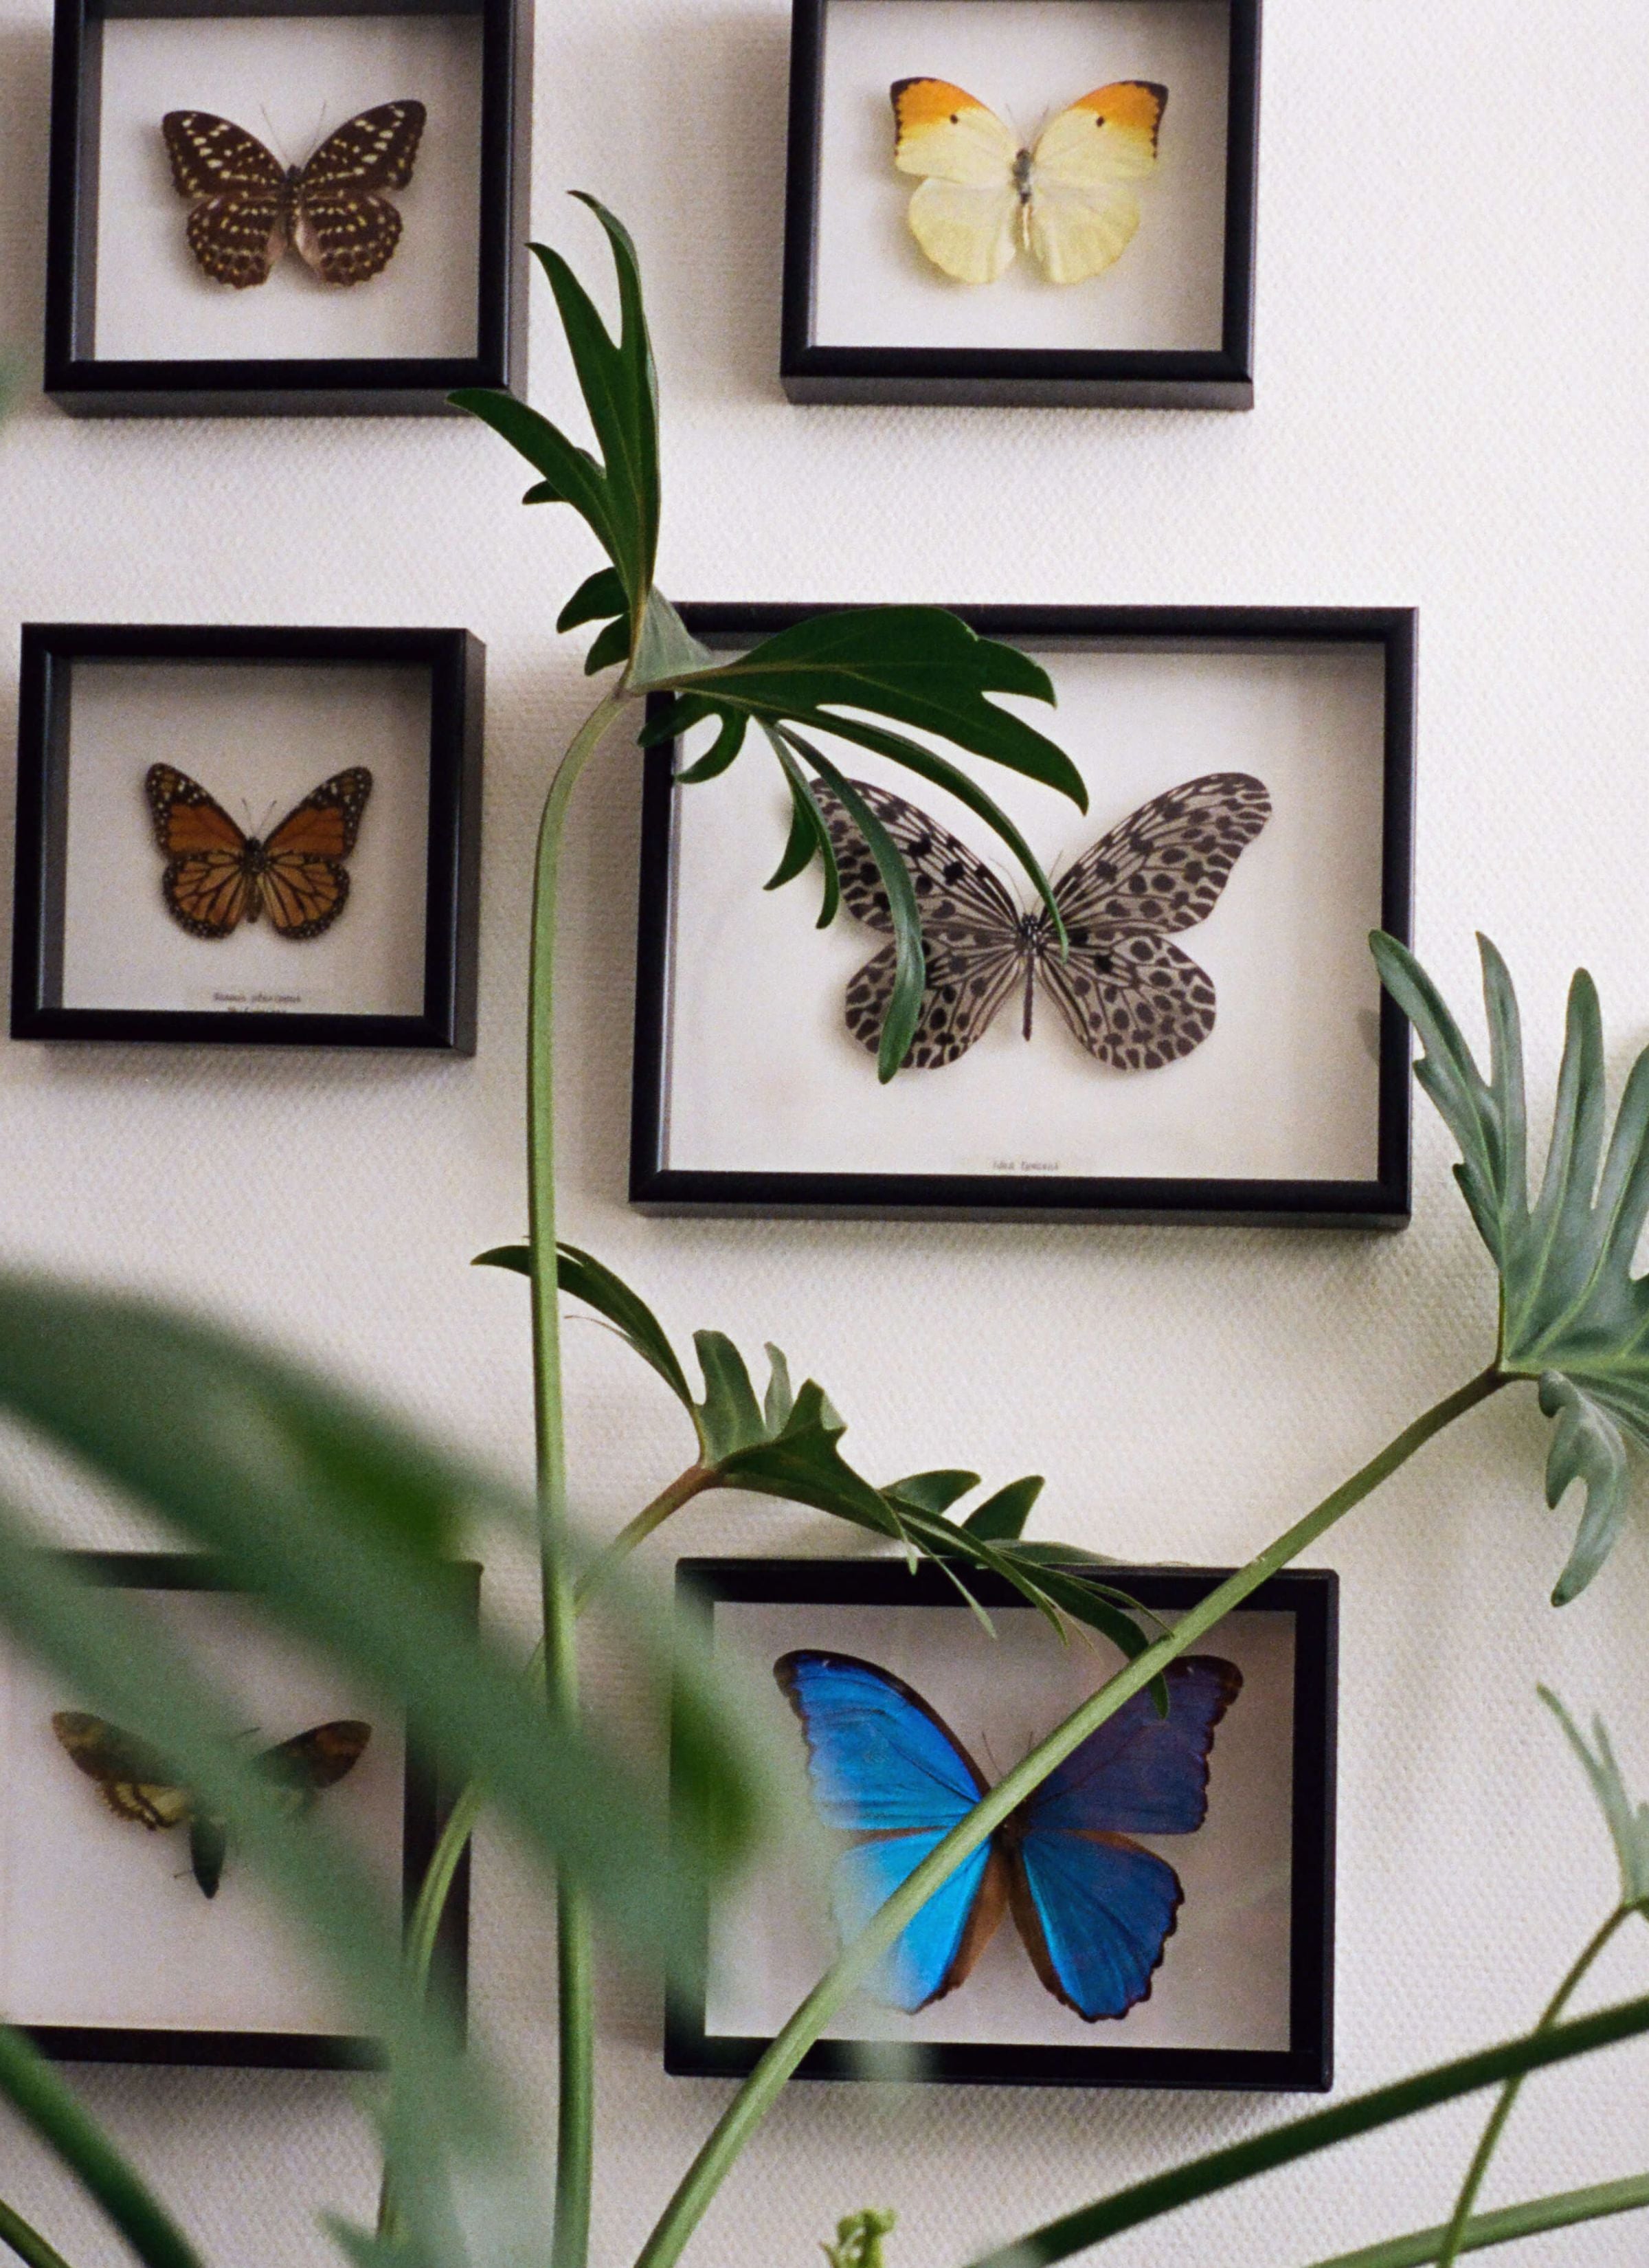 A variety of butterfly specimens are meticulously framed and arranged on the wall, their vibrant colors and delicate wings on display. Lush green plants sit in front of the display, adding a touch of nature to the scene. The framed butterflies create a visually captivating focal point, inviting viewers to admire the beauty and diversity of these winged creatures.